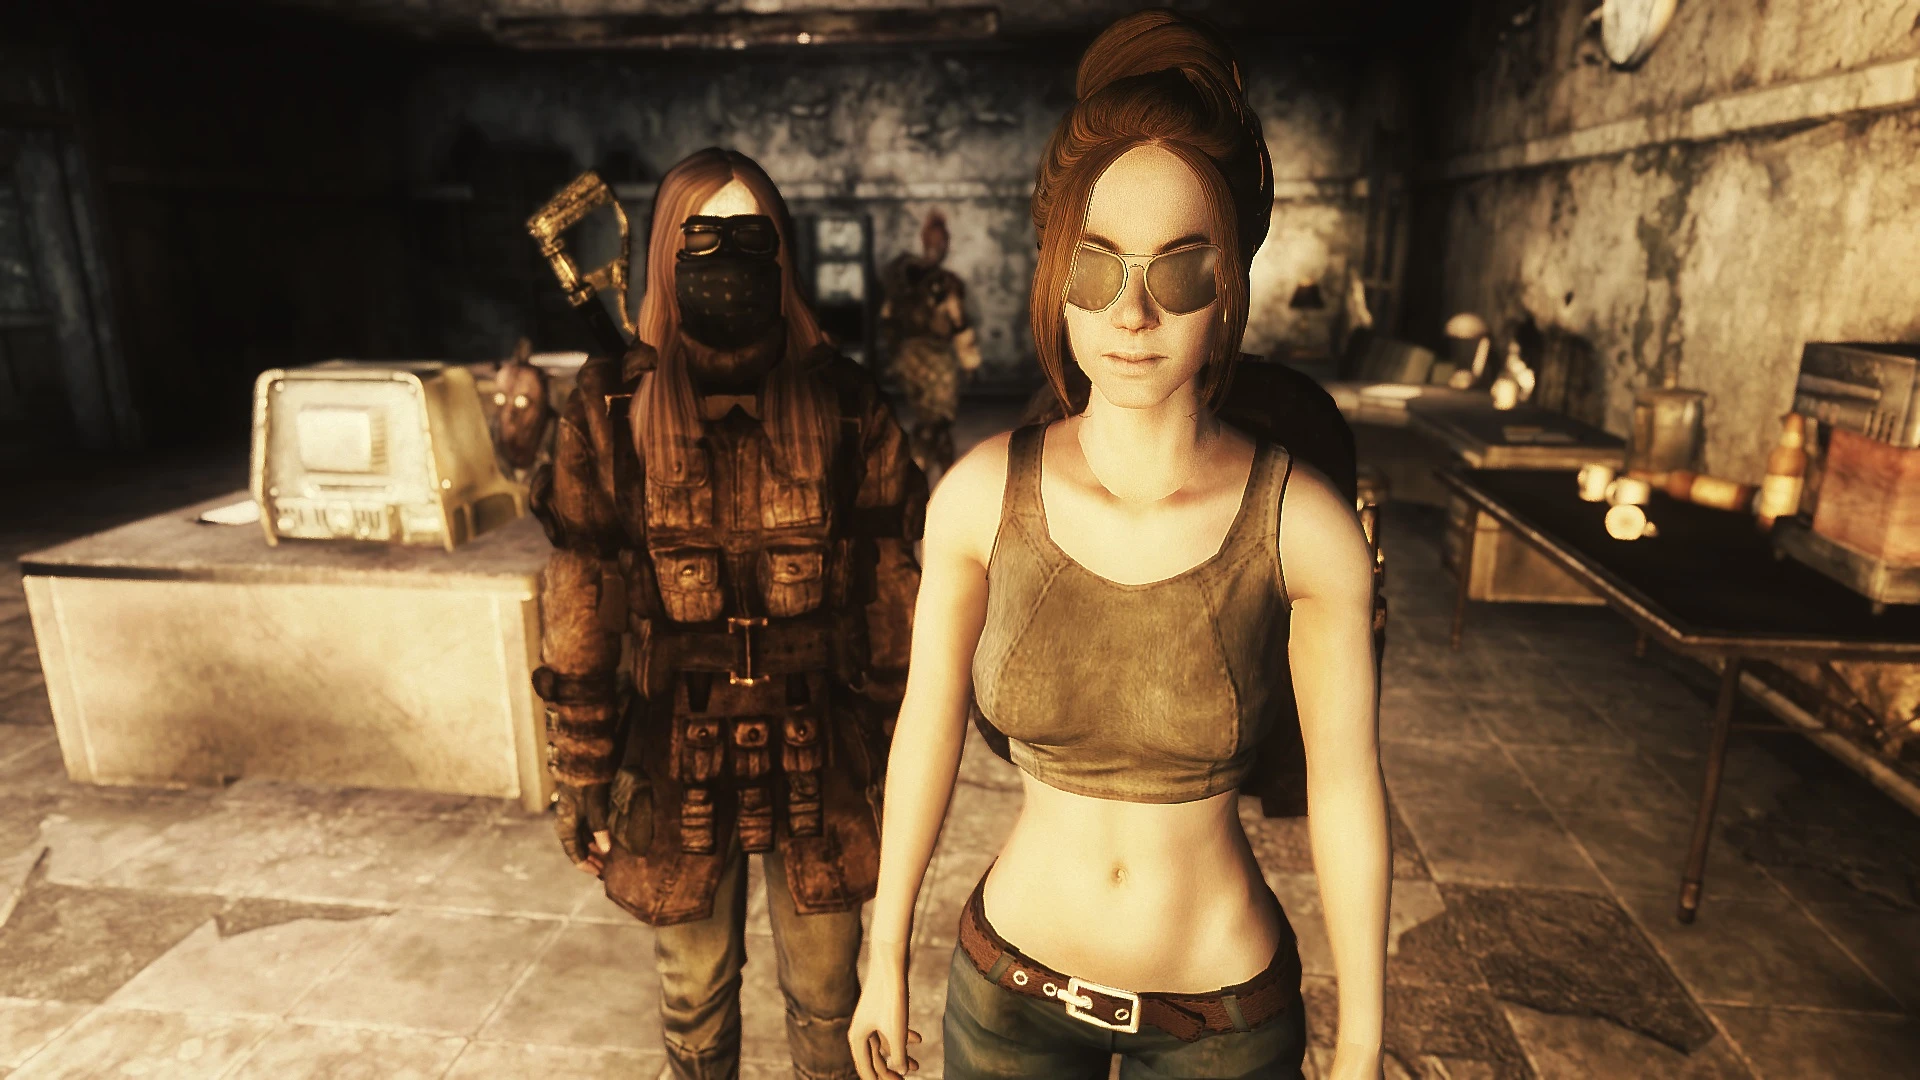 Dust fallout new. Фоллаут дуст. Fallout New Vegas Dust. Fallout Dust Скриншоты. Dust Fallout New Vegas Вики.